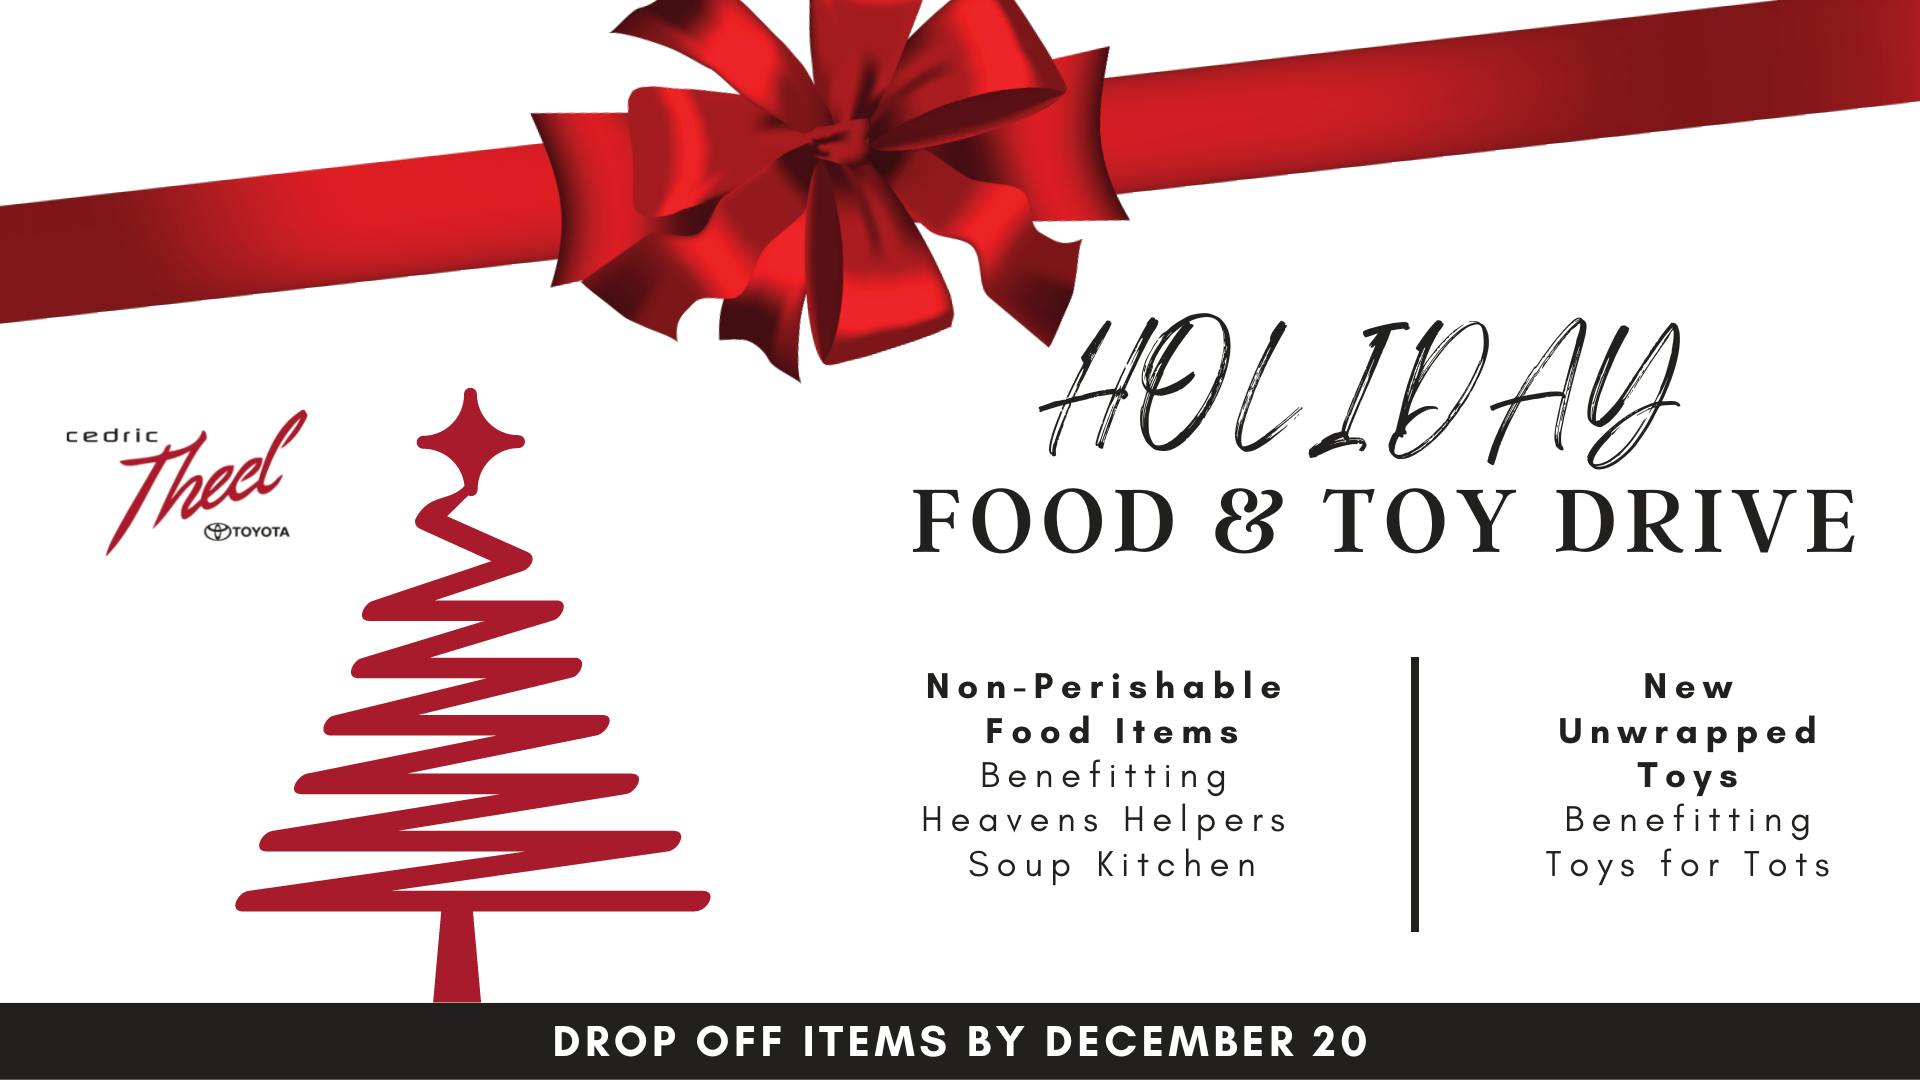 Cedric Theel Holiday Food & Toy Drive